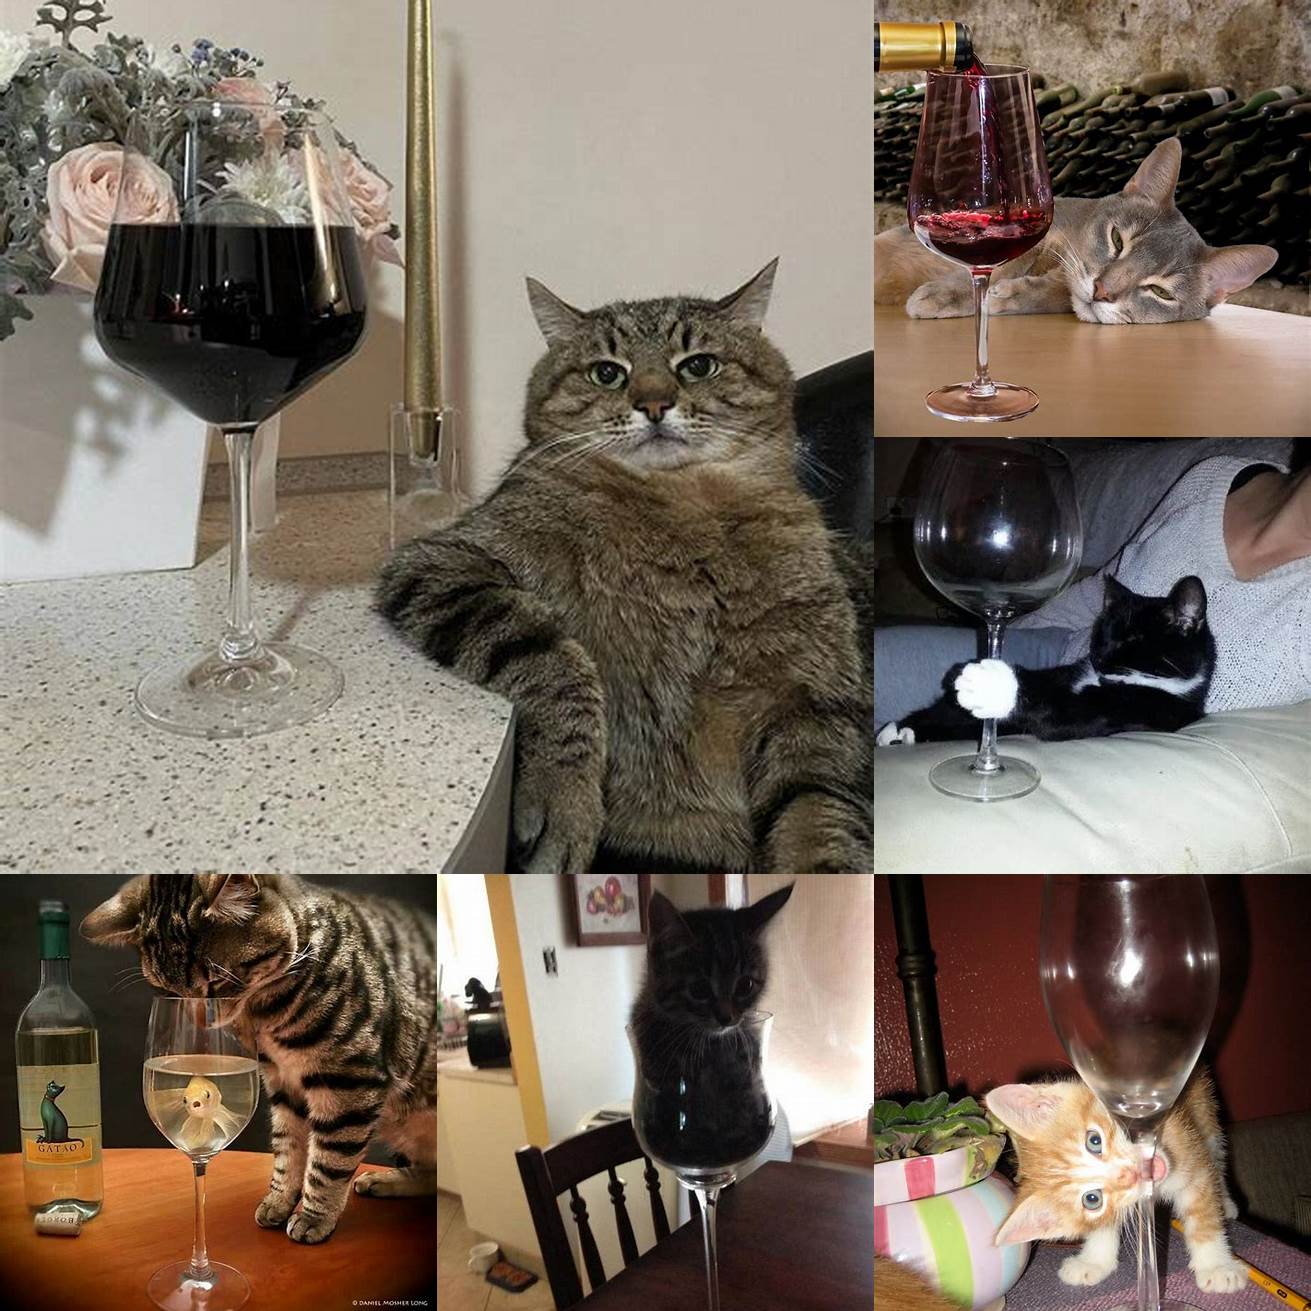 Cat drinking from a wine glass